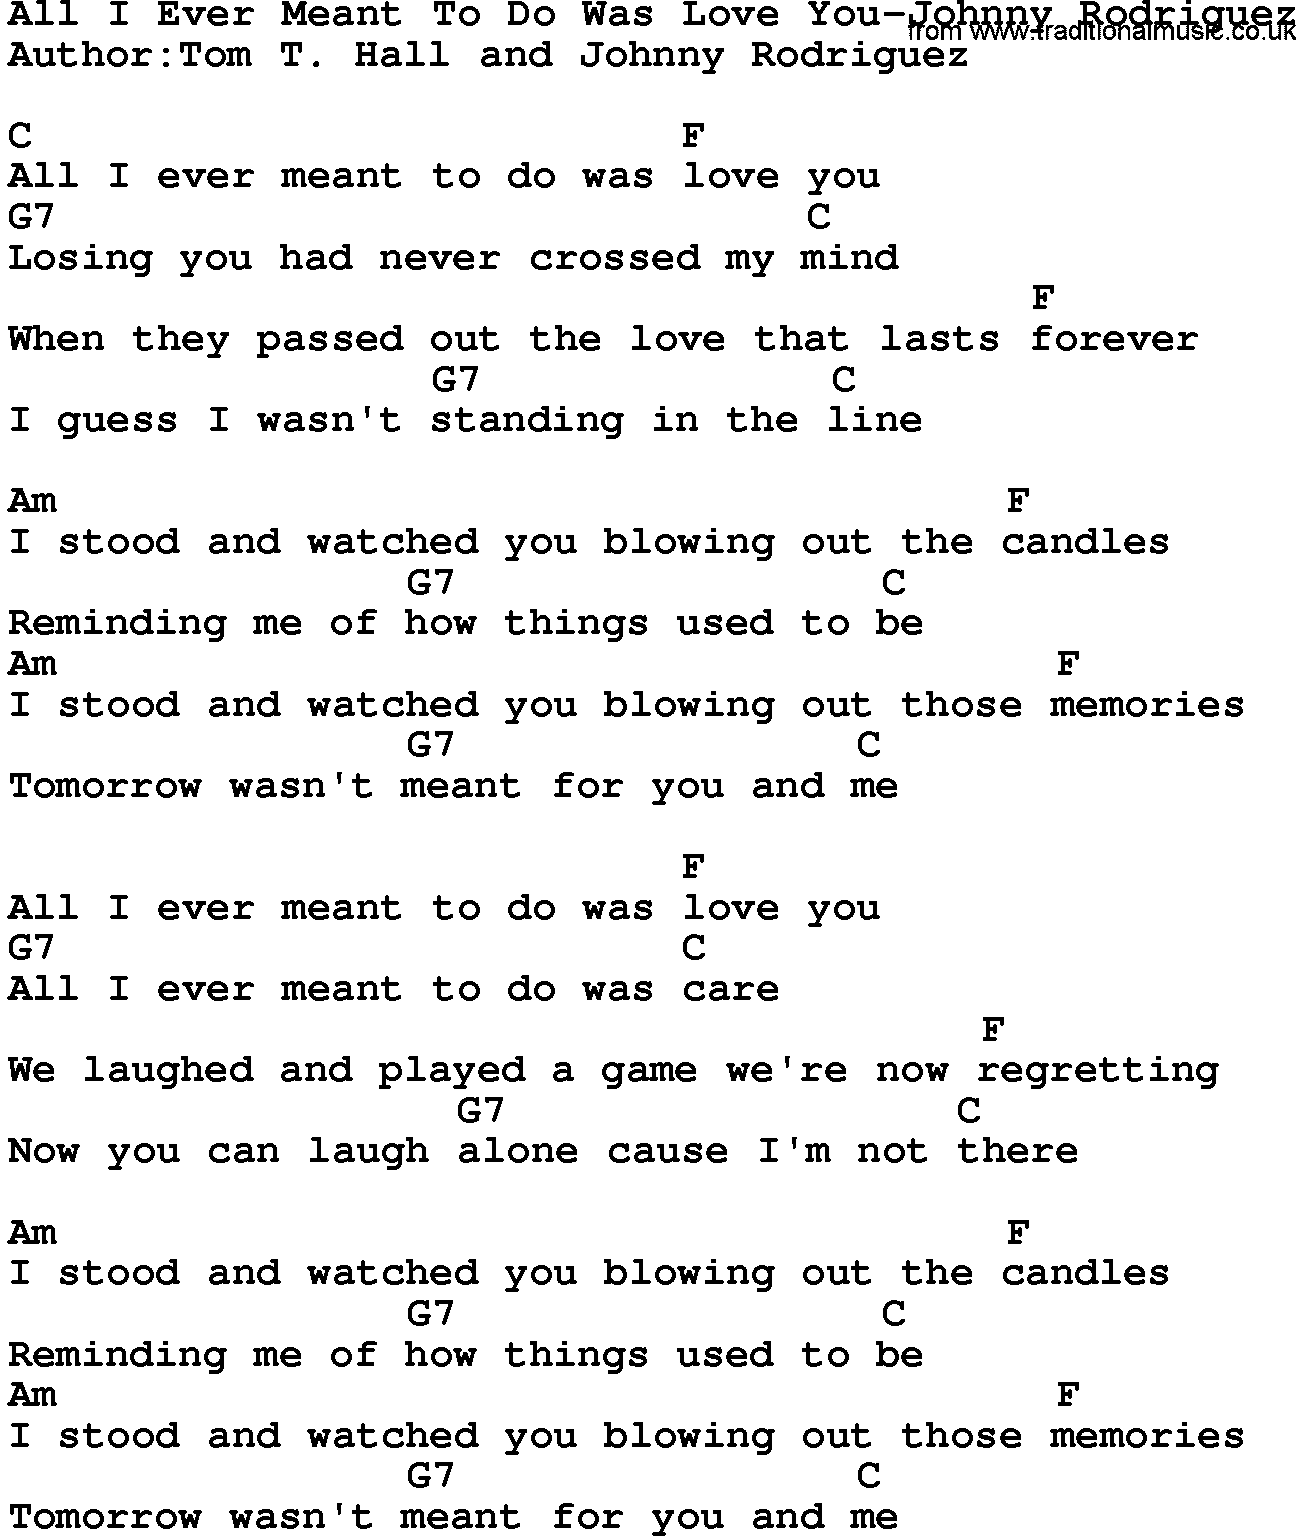 Country music song: All I Ever Meant To Do Was Love You-Johnny Rodriguez lyrics and chords